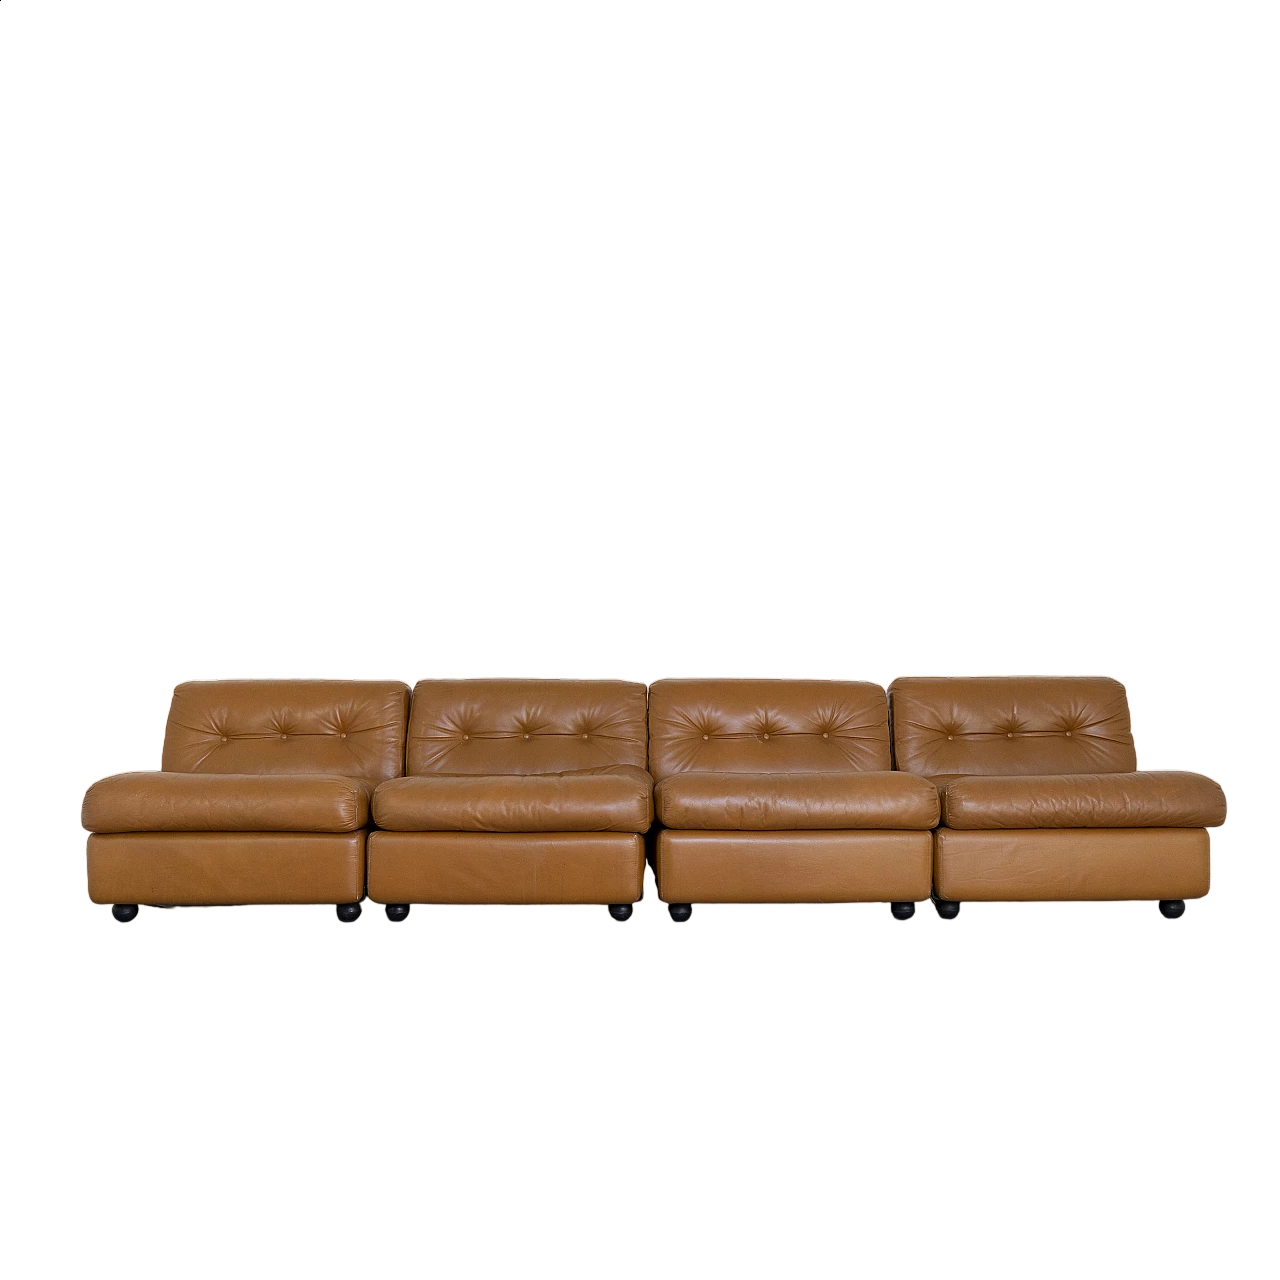 4 Amanta armchairs in cognac-coloured leather by Mario Bellini for B&B Italia, 1970s 9